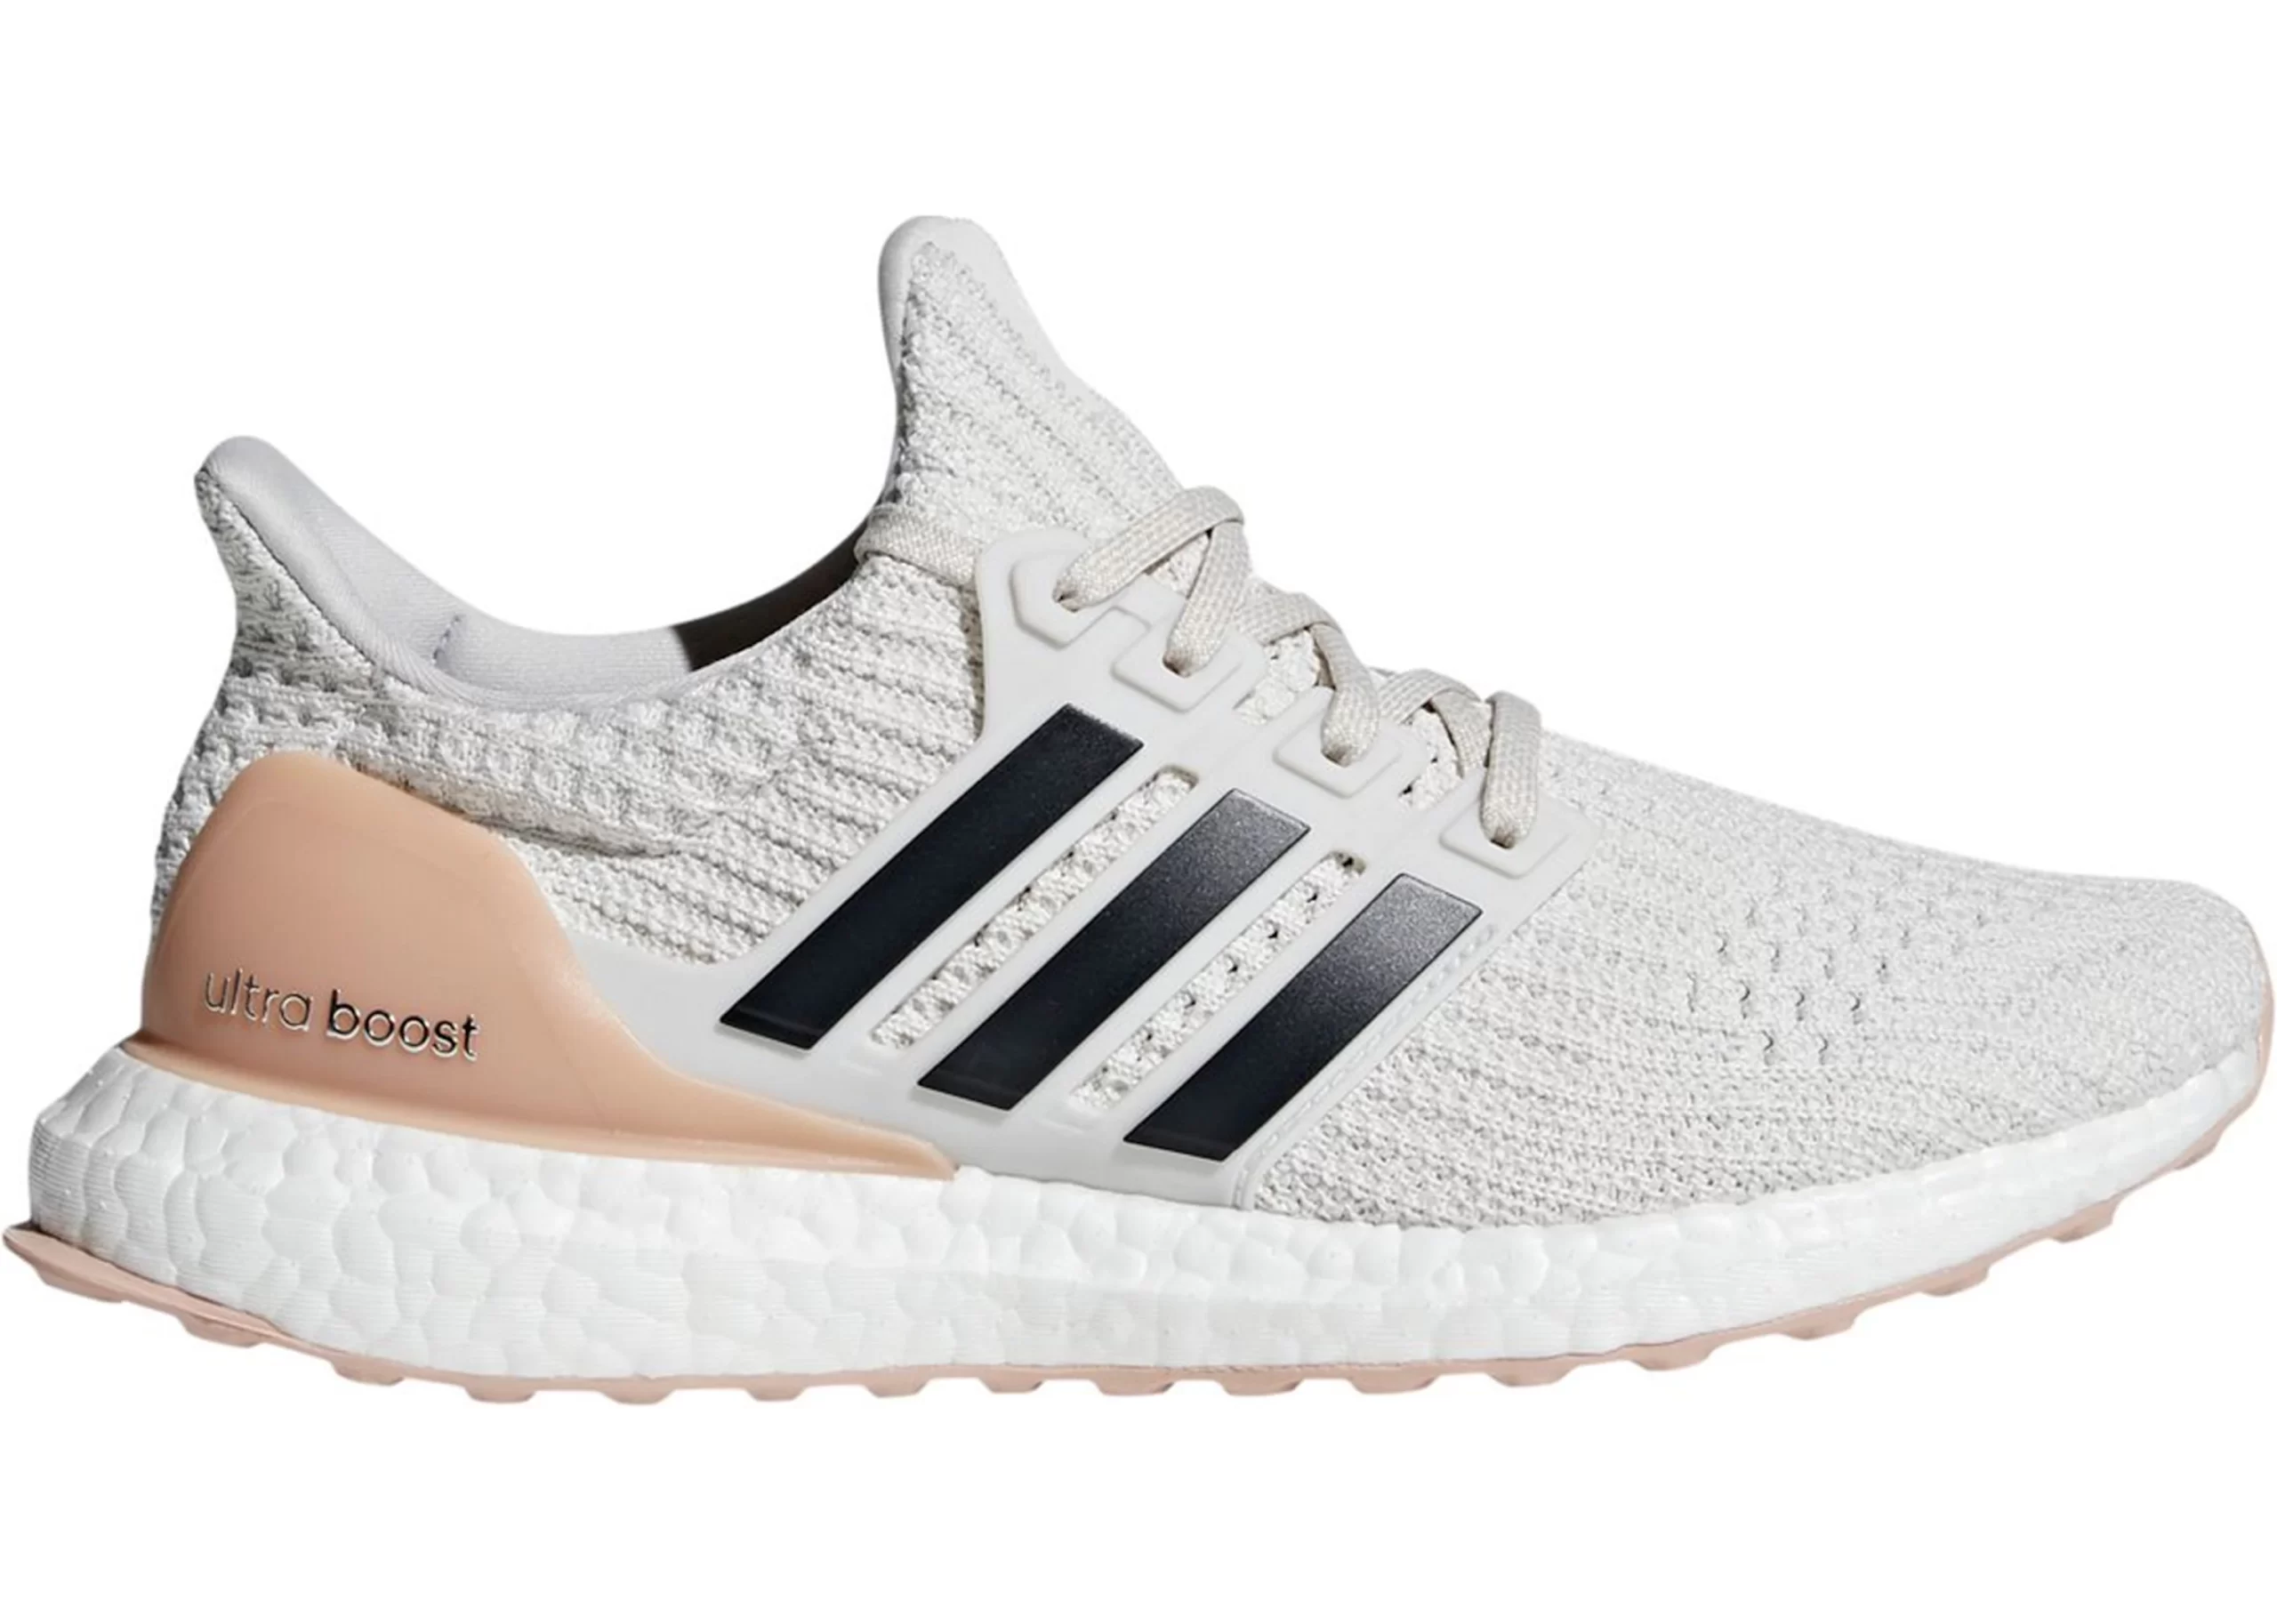 Adidas Ultra Boost 4.0 Show Your Stripes Cloud White (women’s)